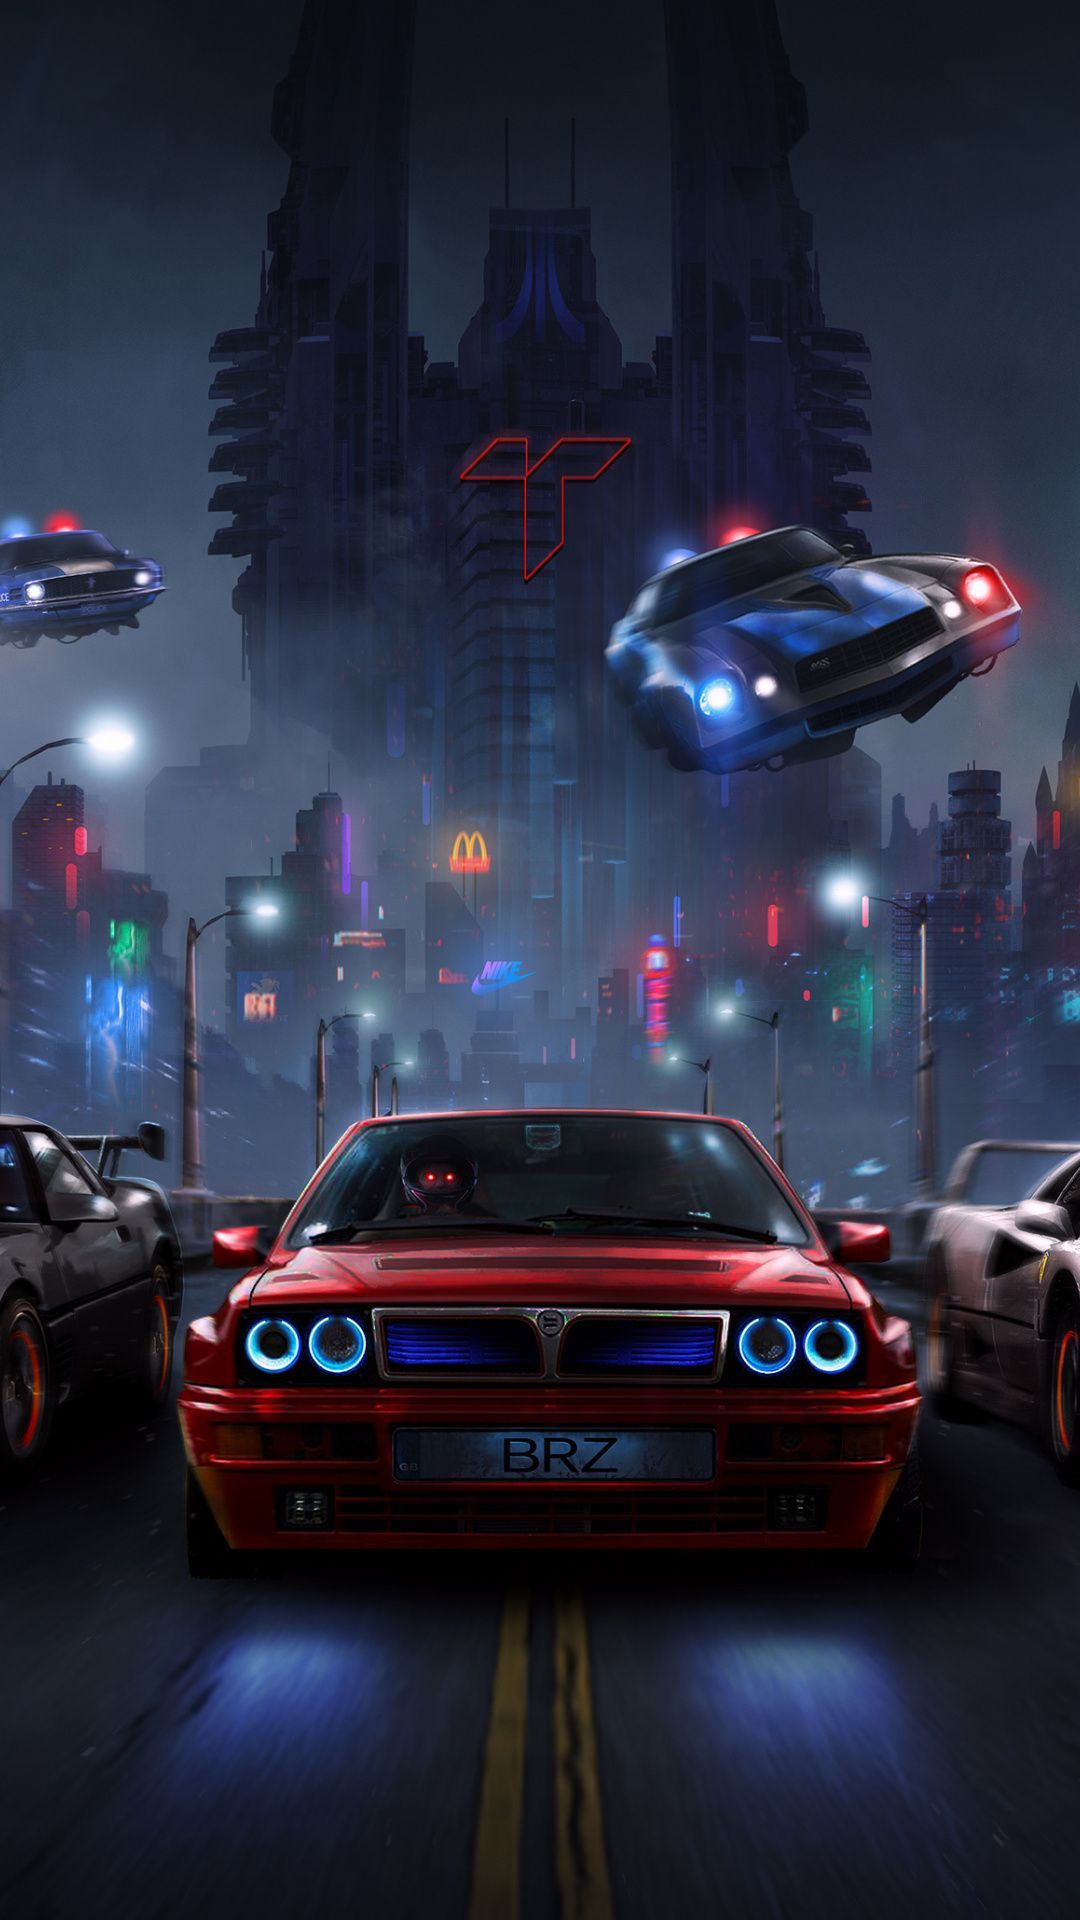 Racers night, chase, cars, 1080x1920 wallpaper. Sports car wallpaper, Futuristic cars, Car wallpaper